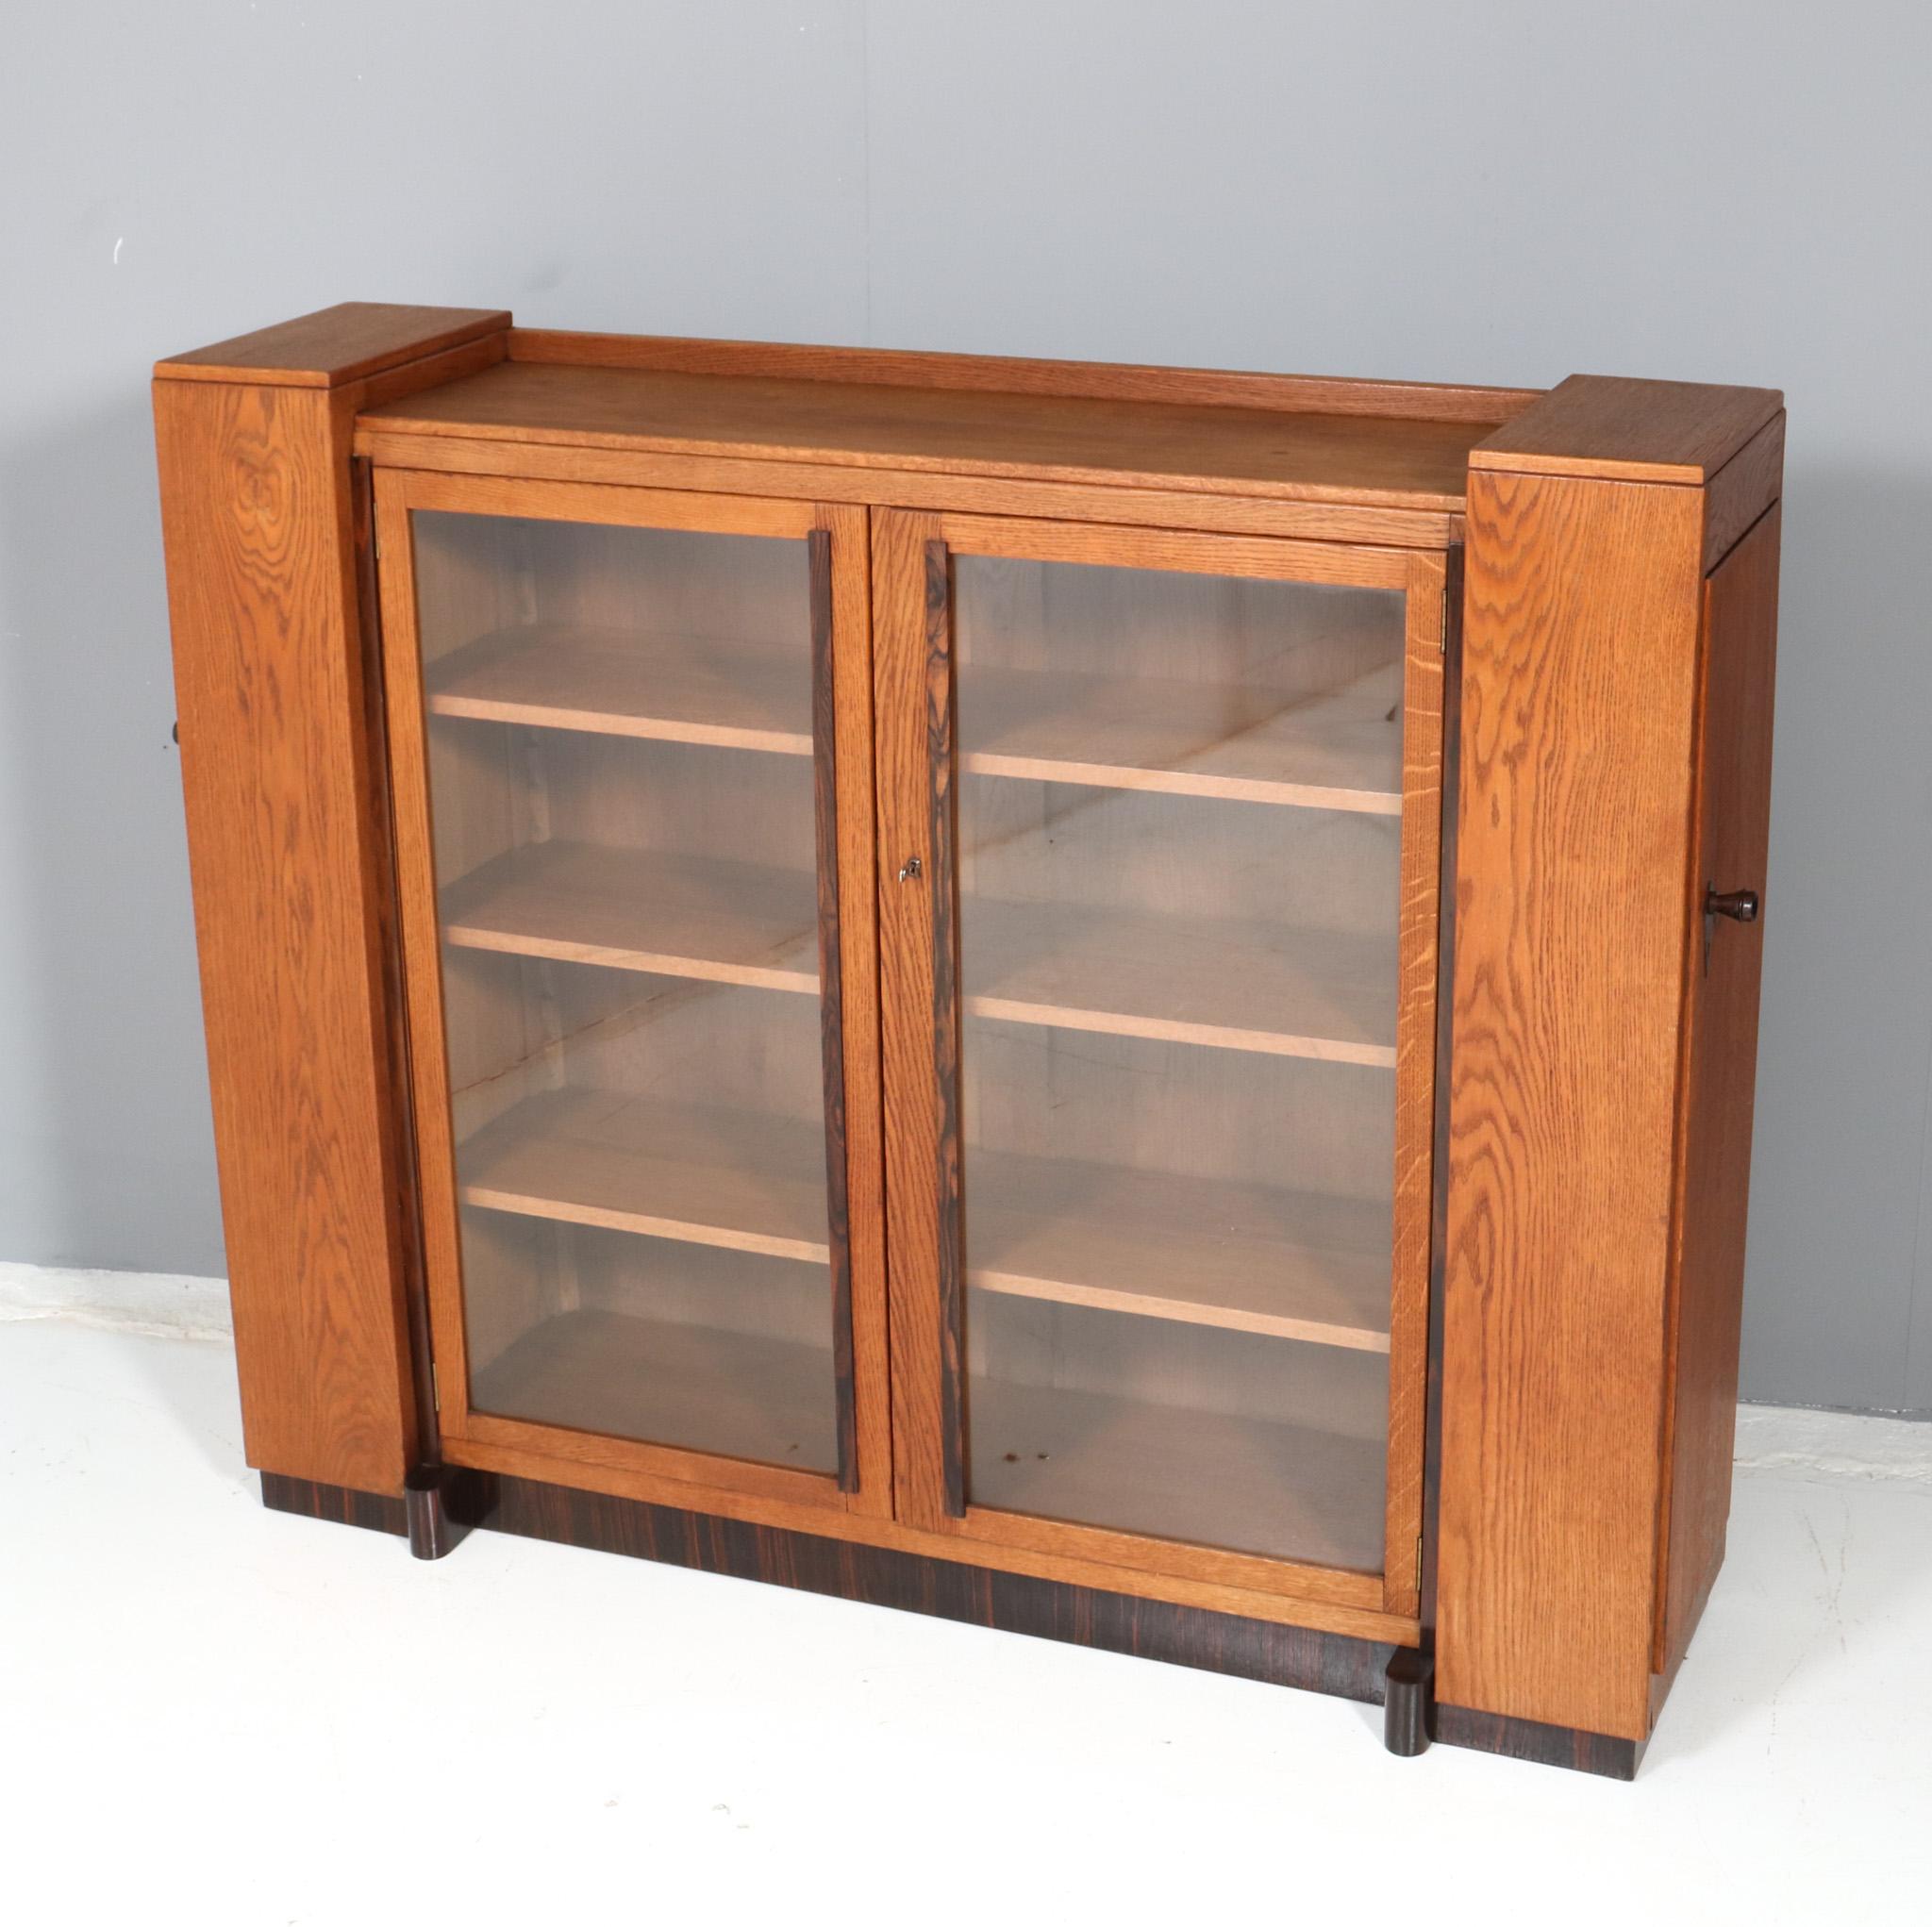  Art Deco Modernist Oak Four-Door Bookcase, 1920s In Good Condition For Sale In Amsterdam, NL